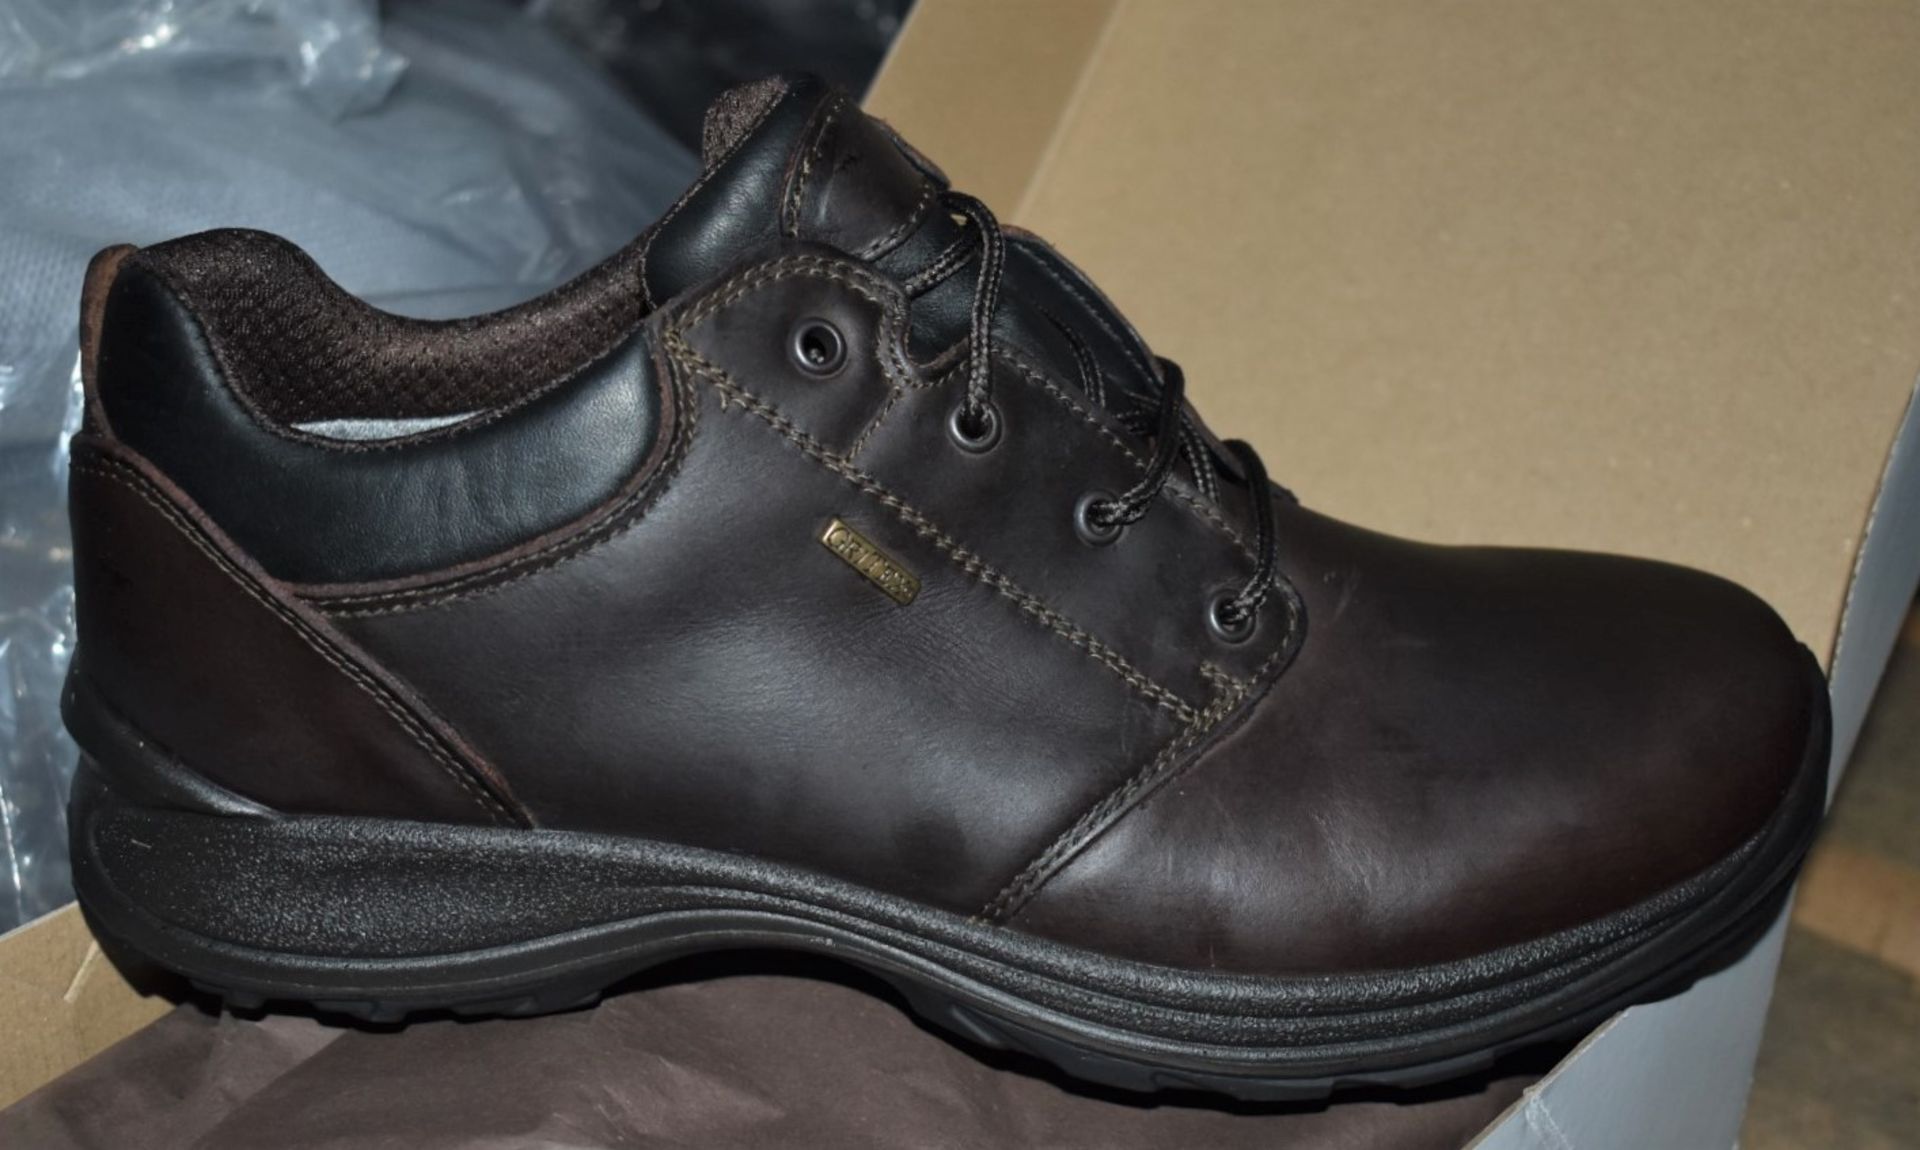 1 x Pair of Men's Grisport Brown Leather GriTex Shoes - Rogerson Footwear - Brand New and Boxed - - Image 4 of 9